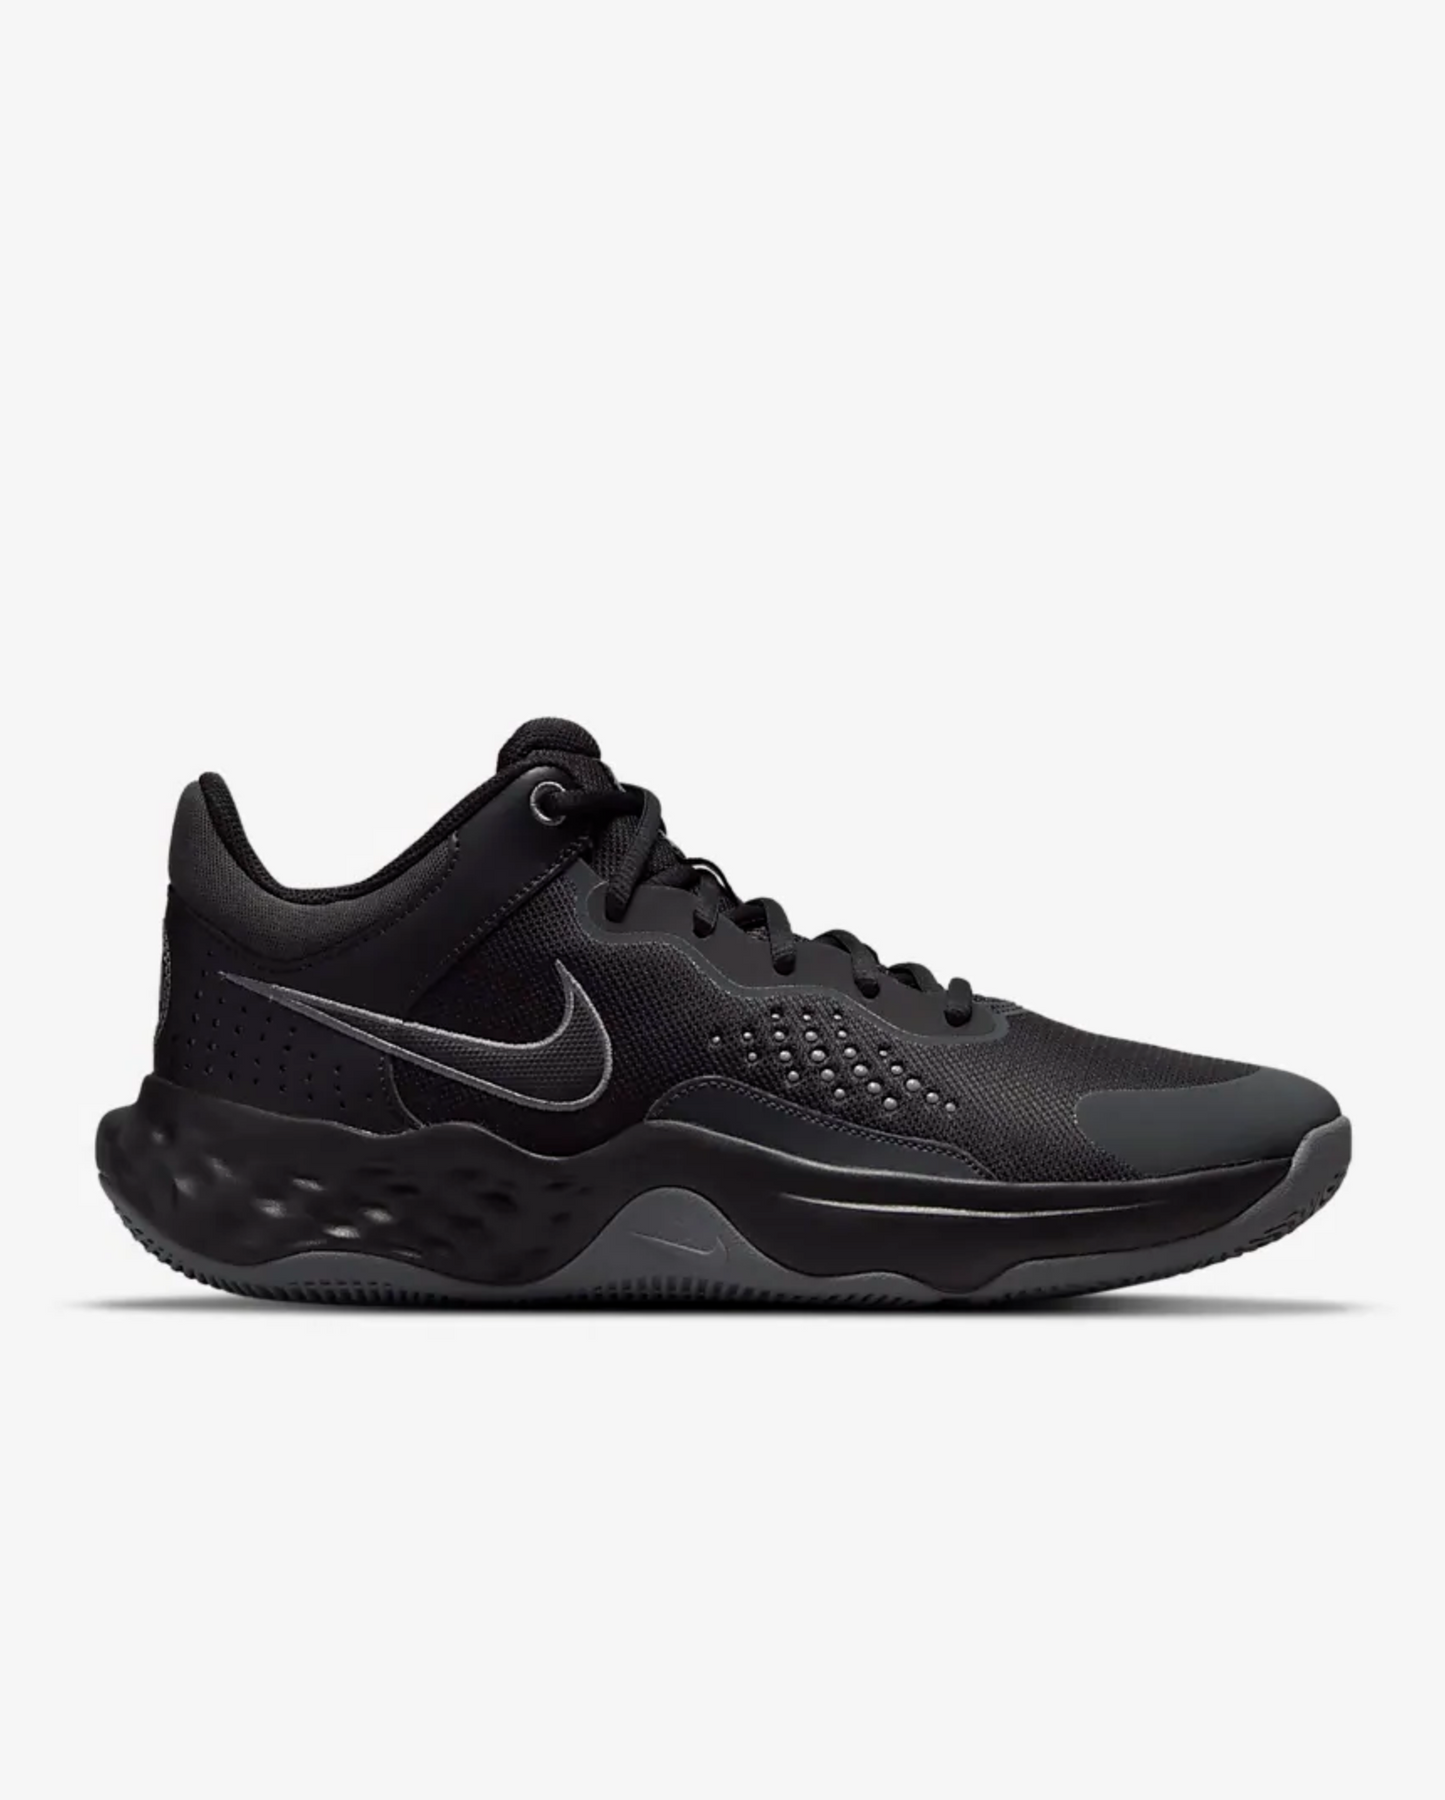 NIKE FLY.BY MID 3 - BLACK/COOL GREY-ANTHRACITE